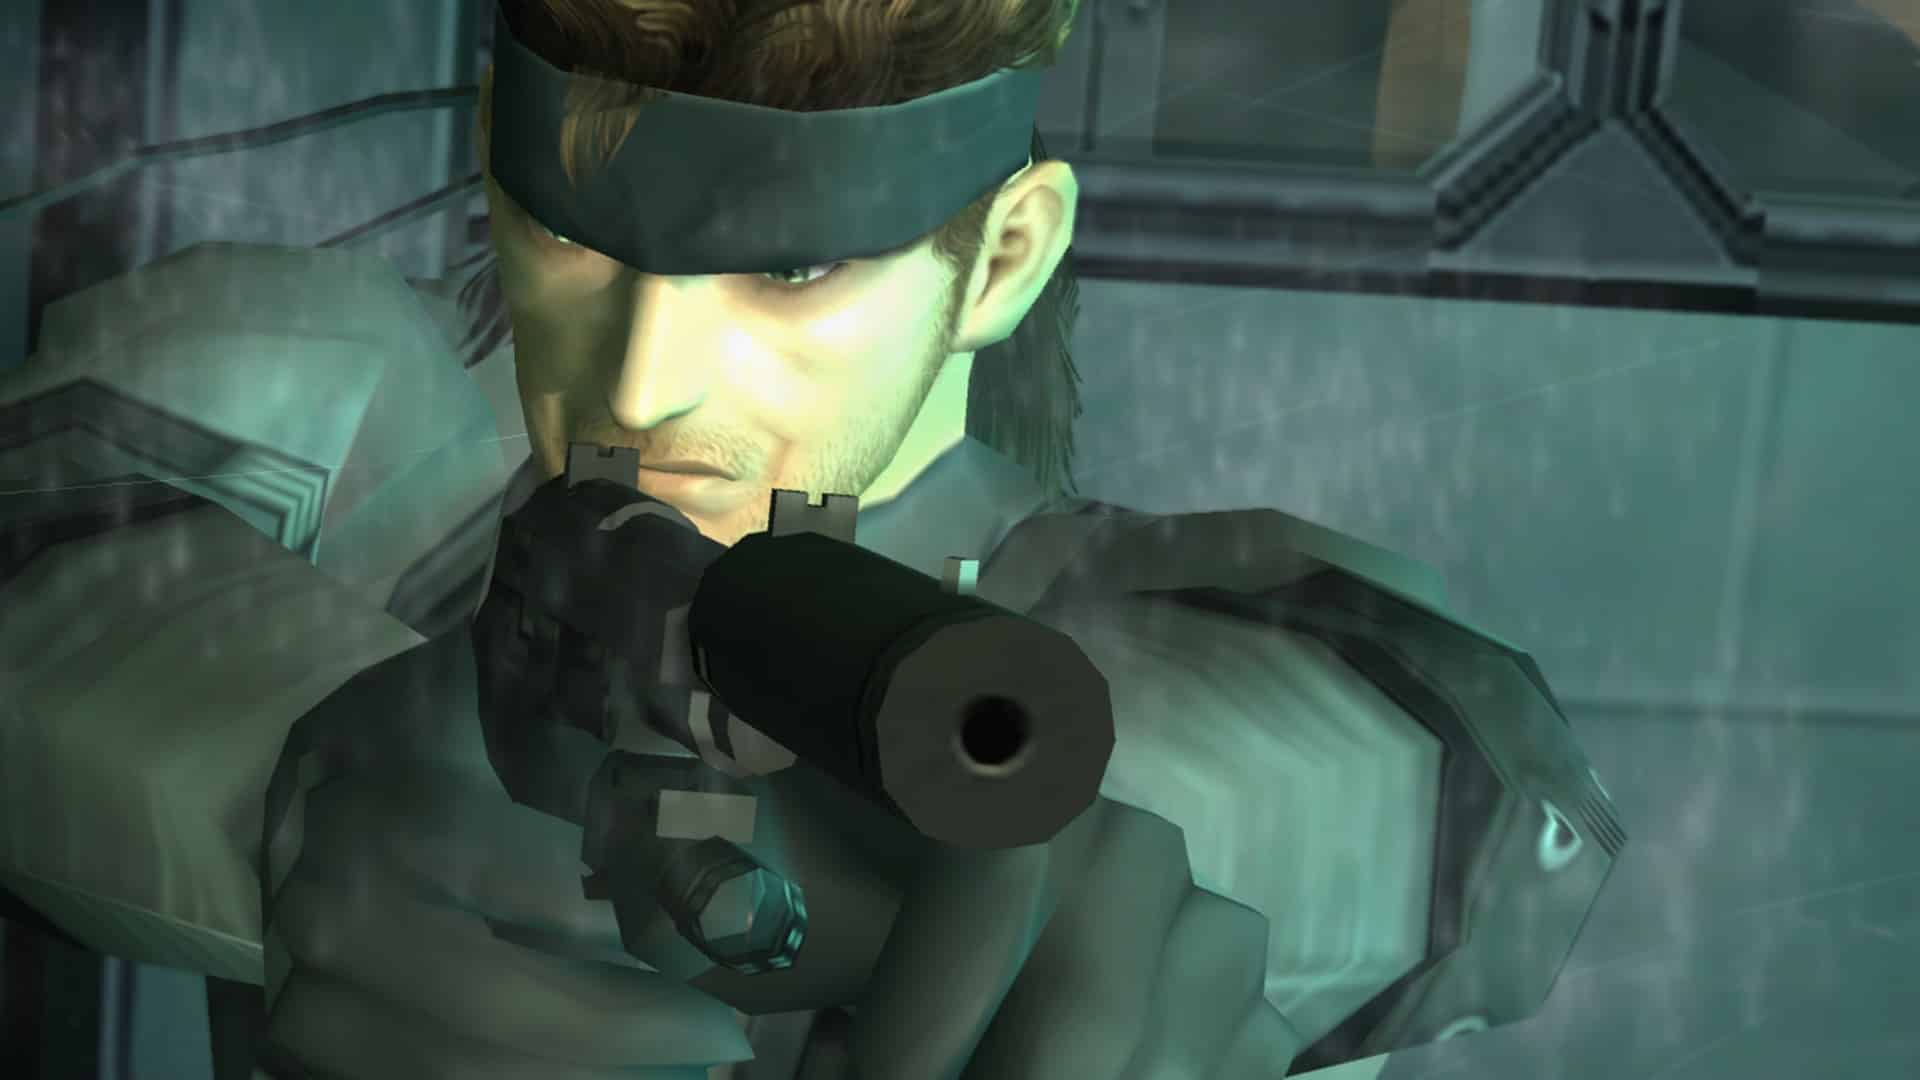 Reports Now Claim Abandoned is a Metal Gear Solid Game